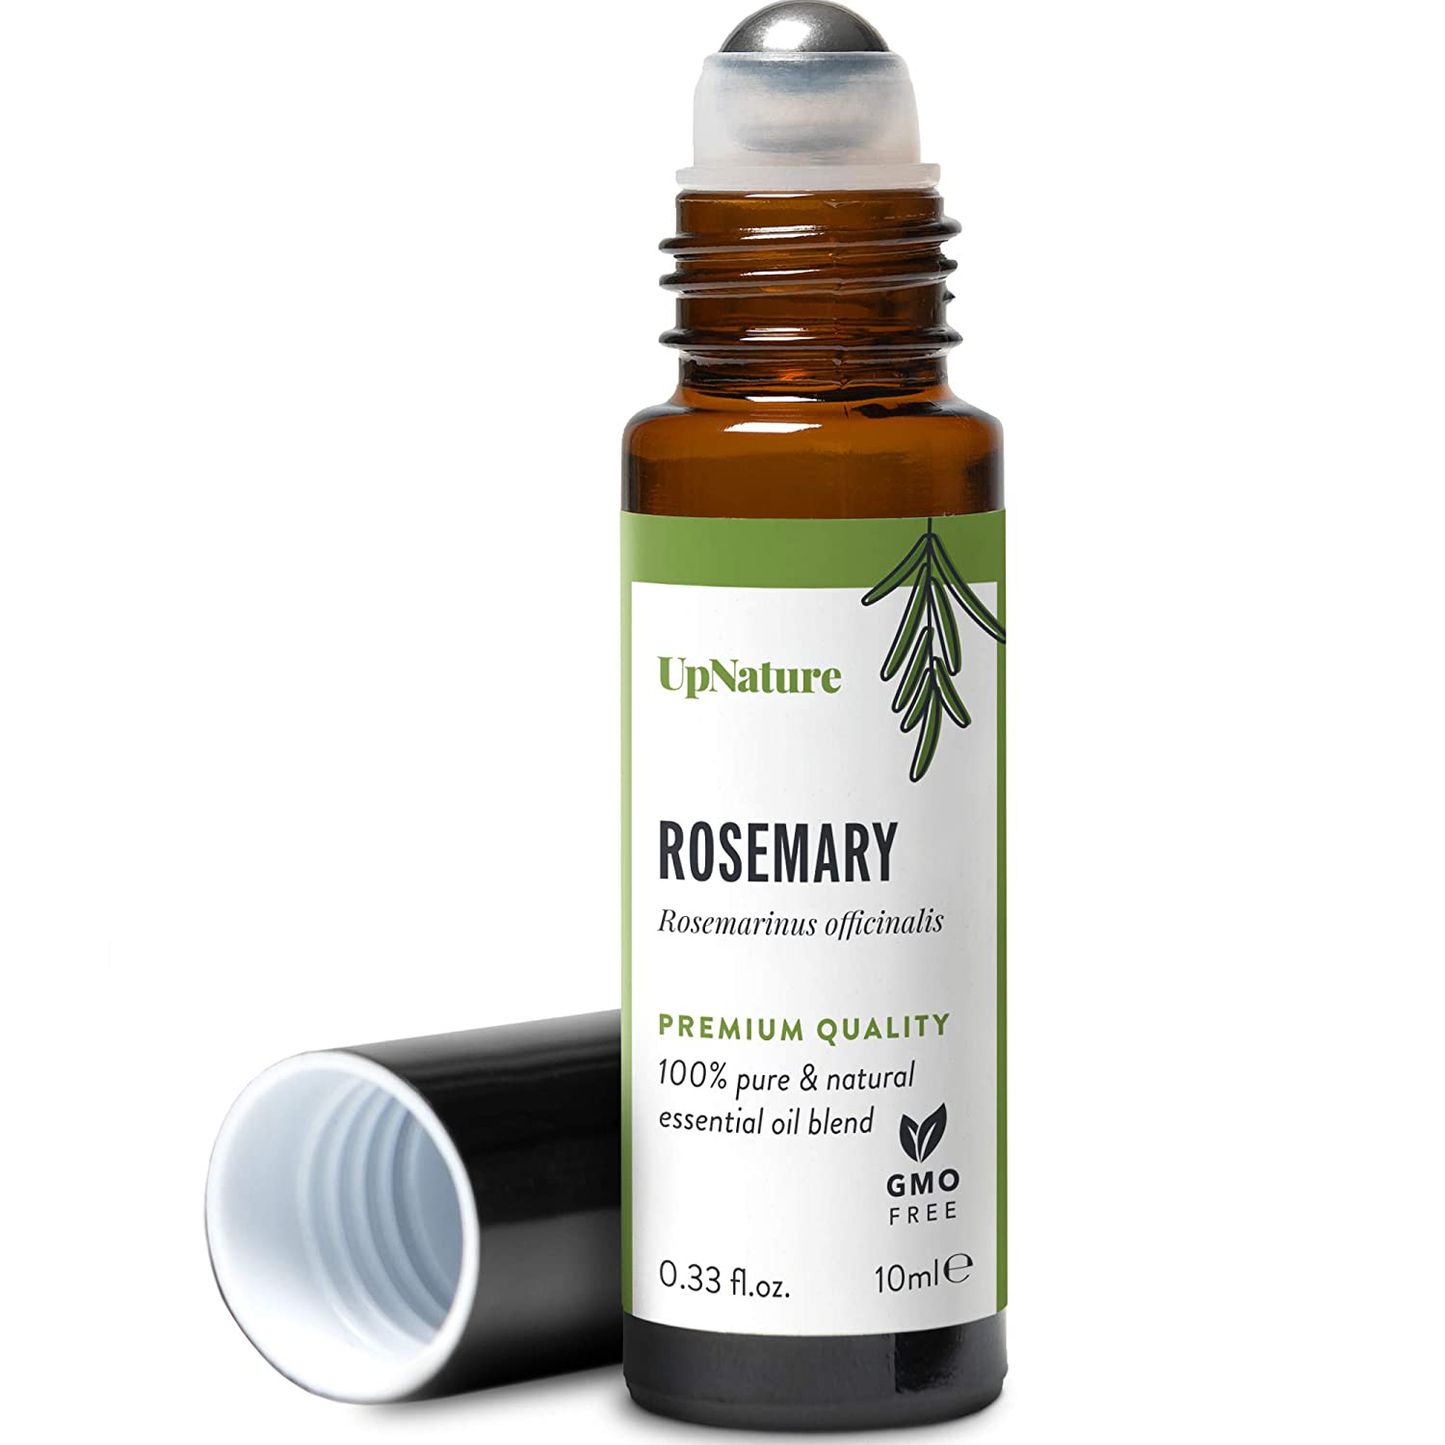 Rosemary Essential Oil Roll-On – Healthy Hair Growth, Improve Focus and Memory, Aromatherapy Therapeutic Grade, Pre-Diluted, Non-GMO, Easy Application, Leak Proof Metal Rollerball, No Diffuser Needed!